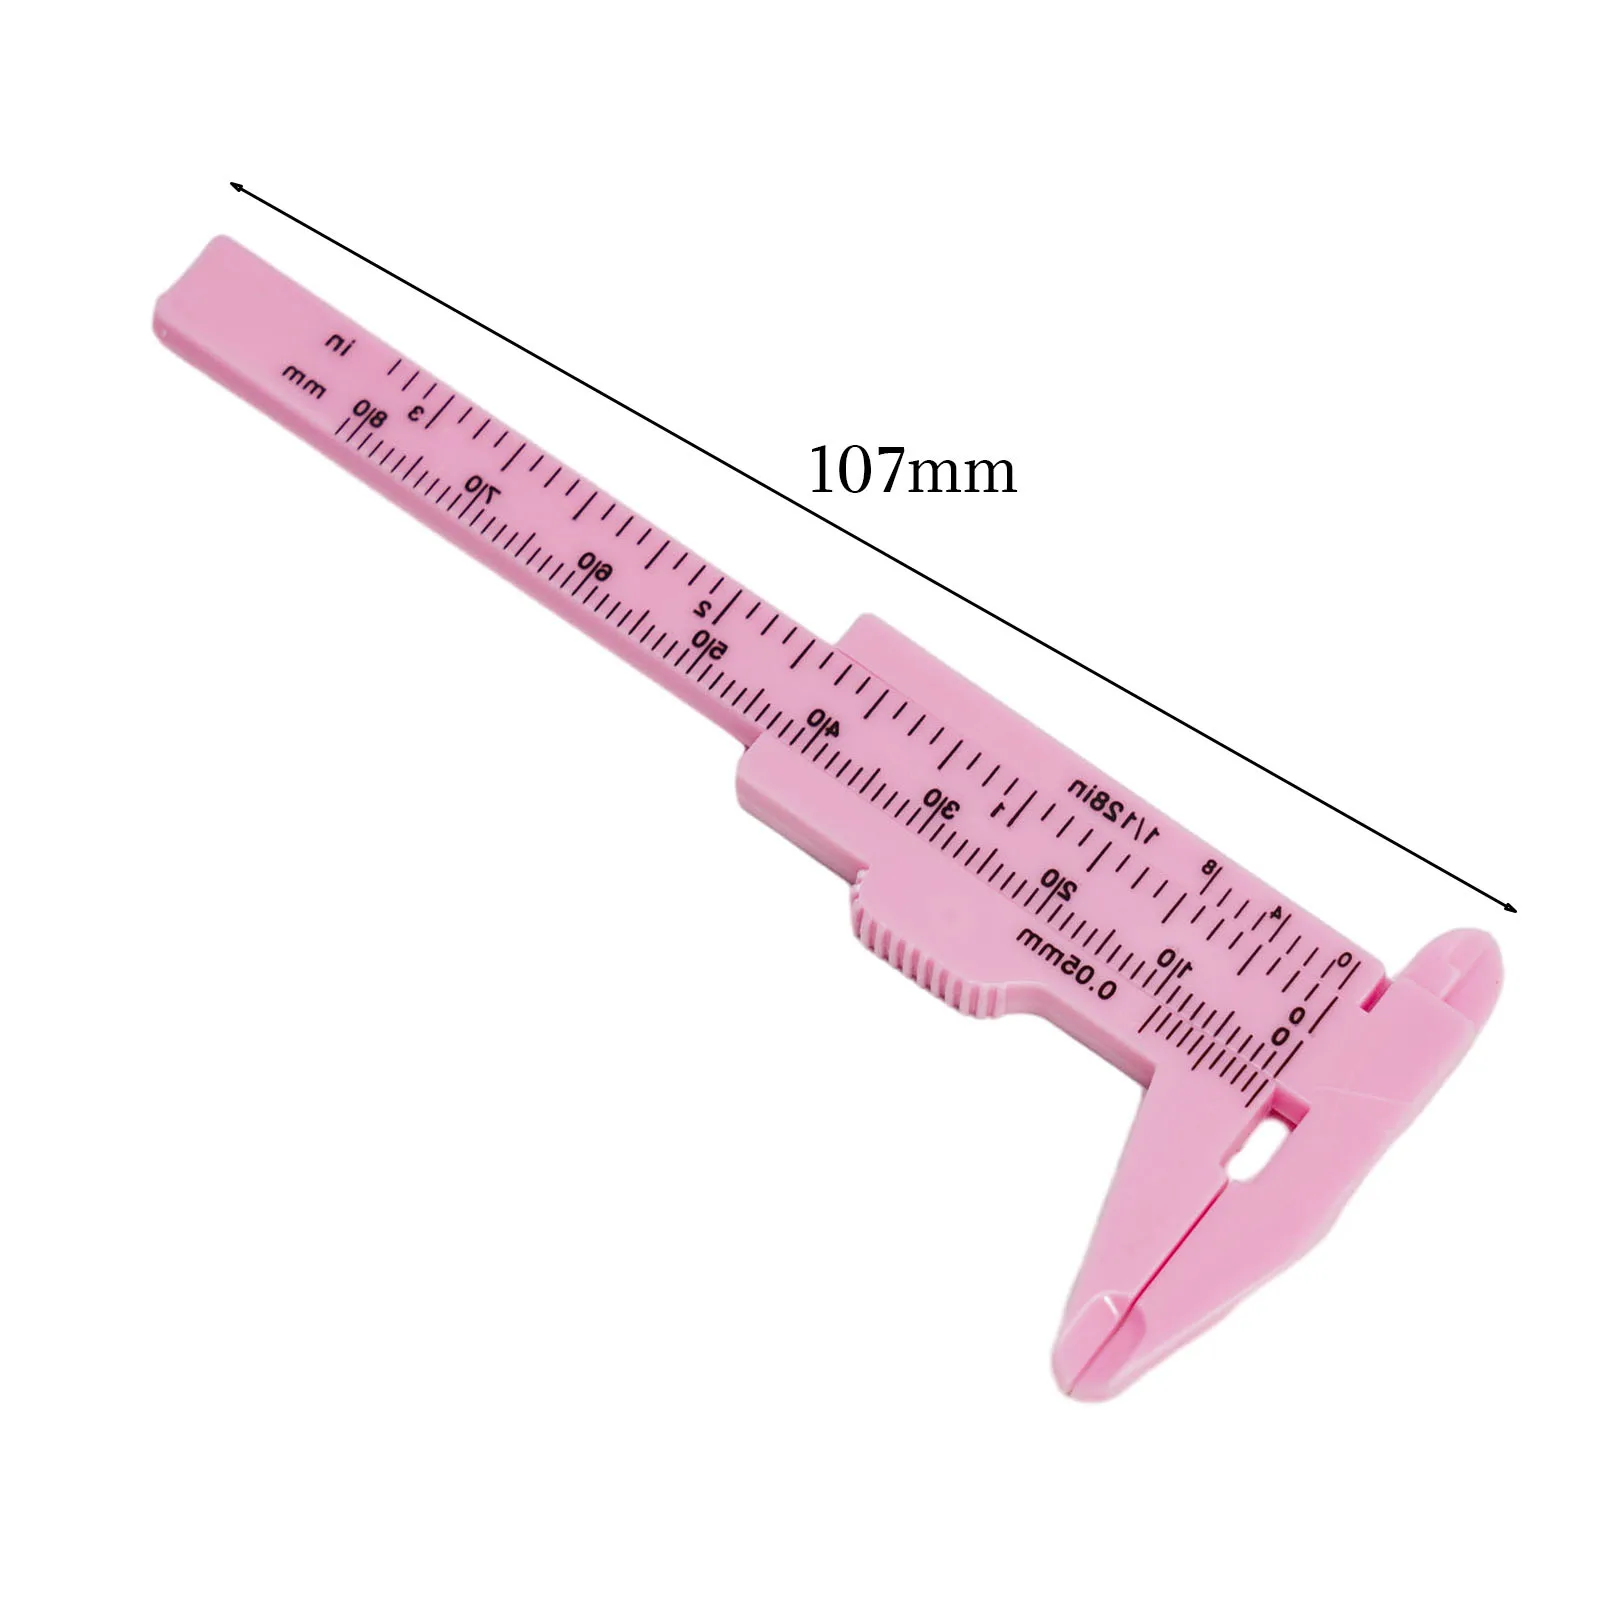 

0-80mm Plastic Sliding Vernier Caliper Gauge Measure Tool Double Scale Ruler For Jewelry Antiques Industrial Measuring